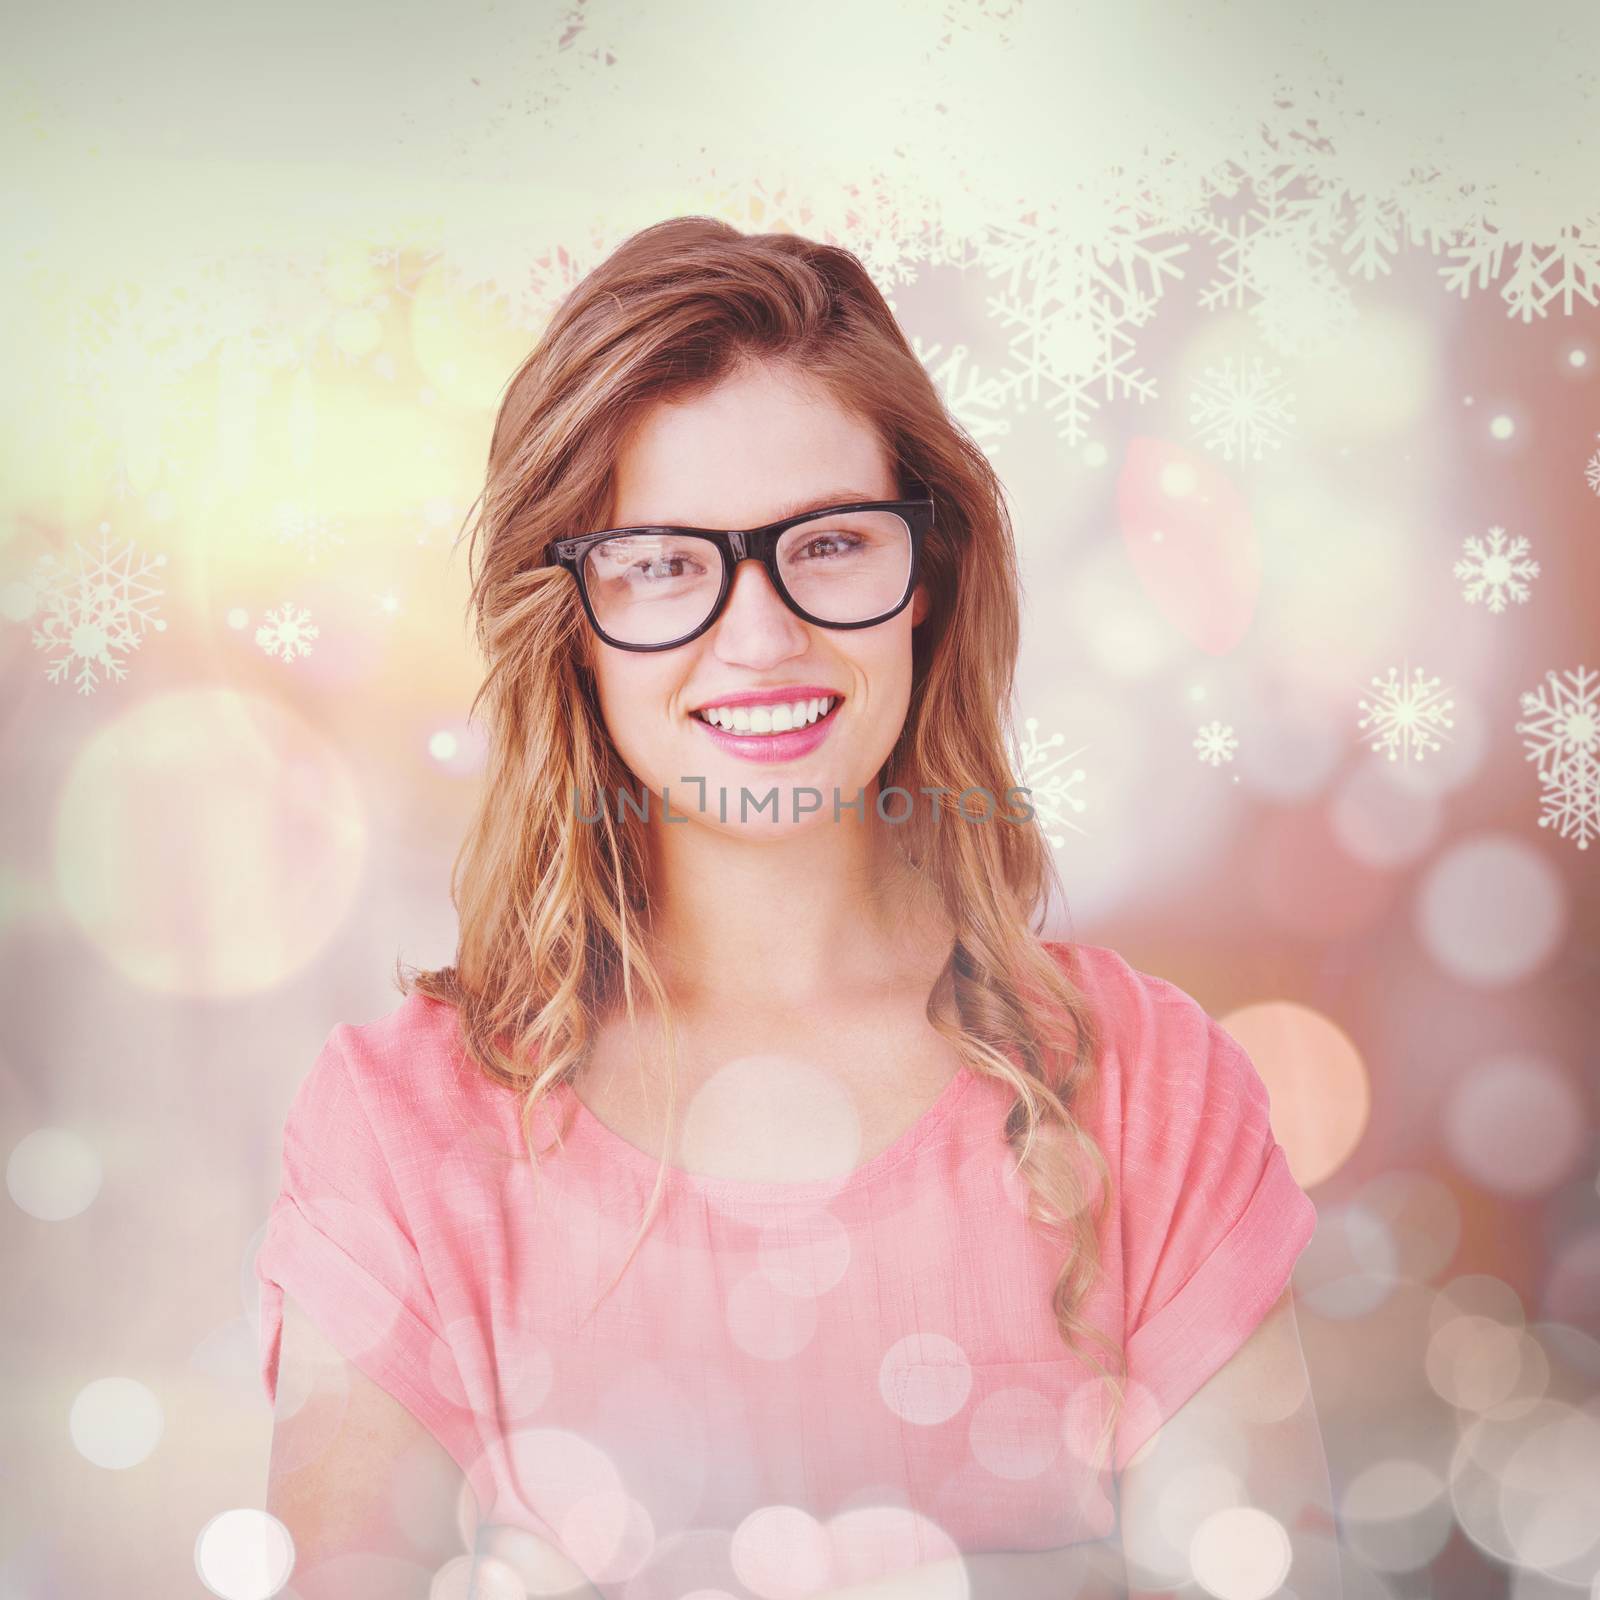 Pretty geeky hipster smiling at camera  against snowflake pattern